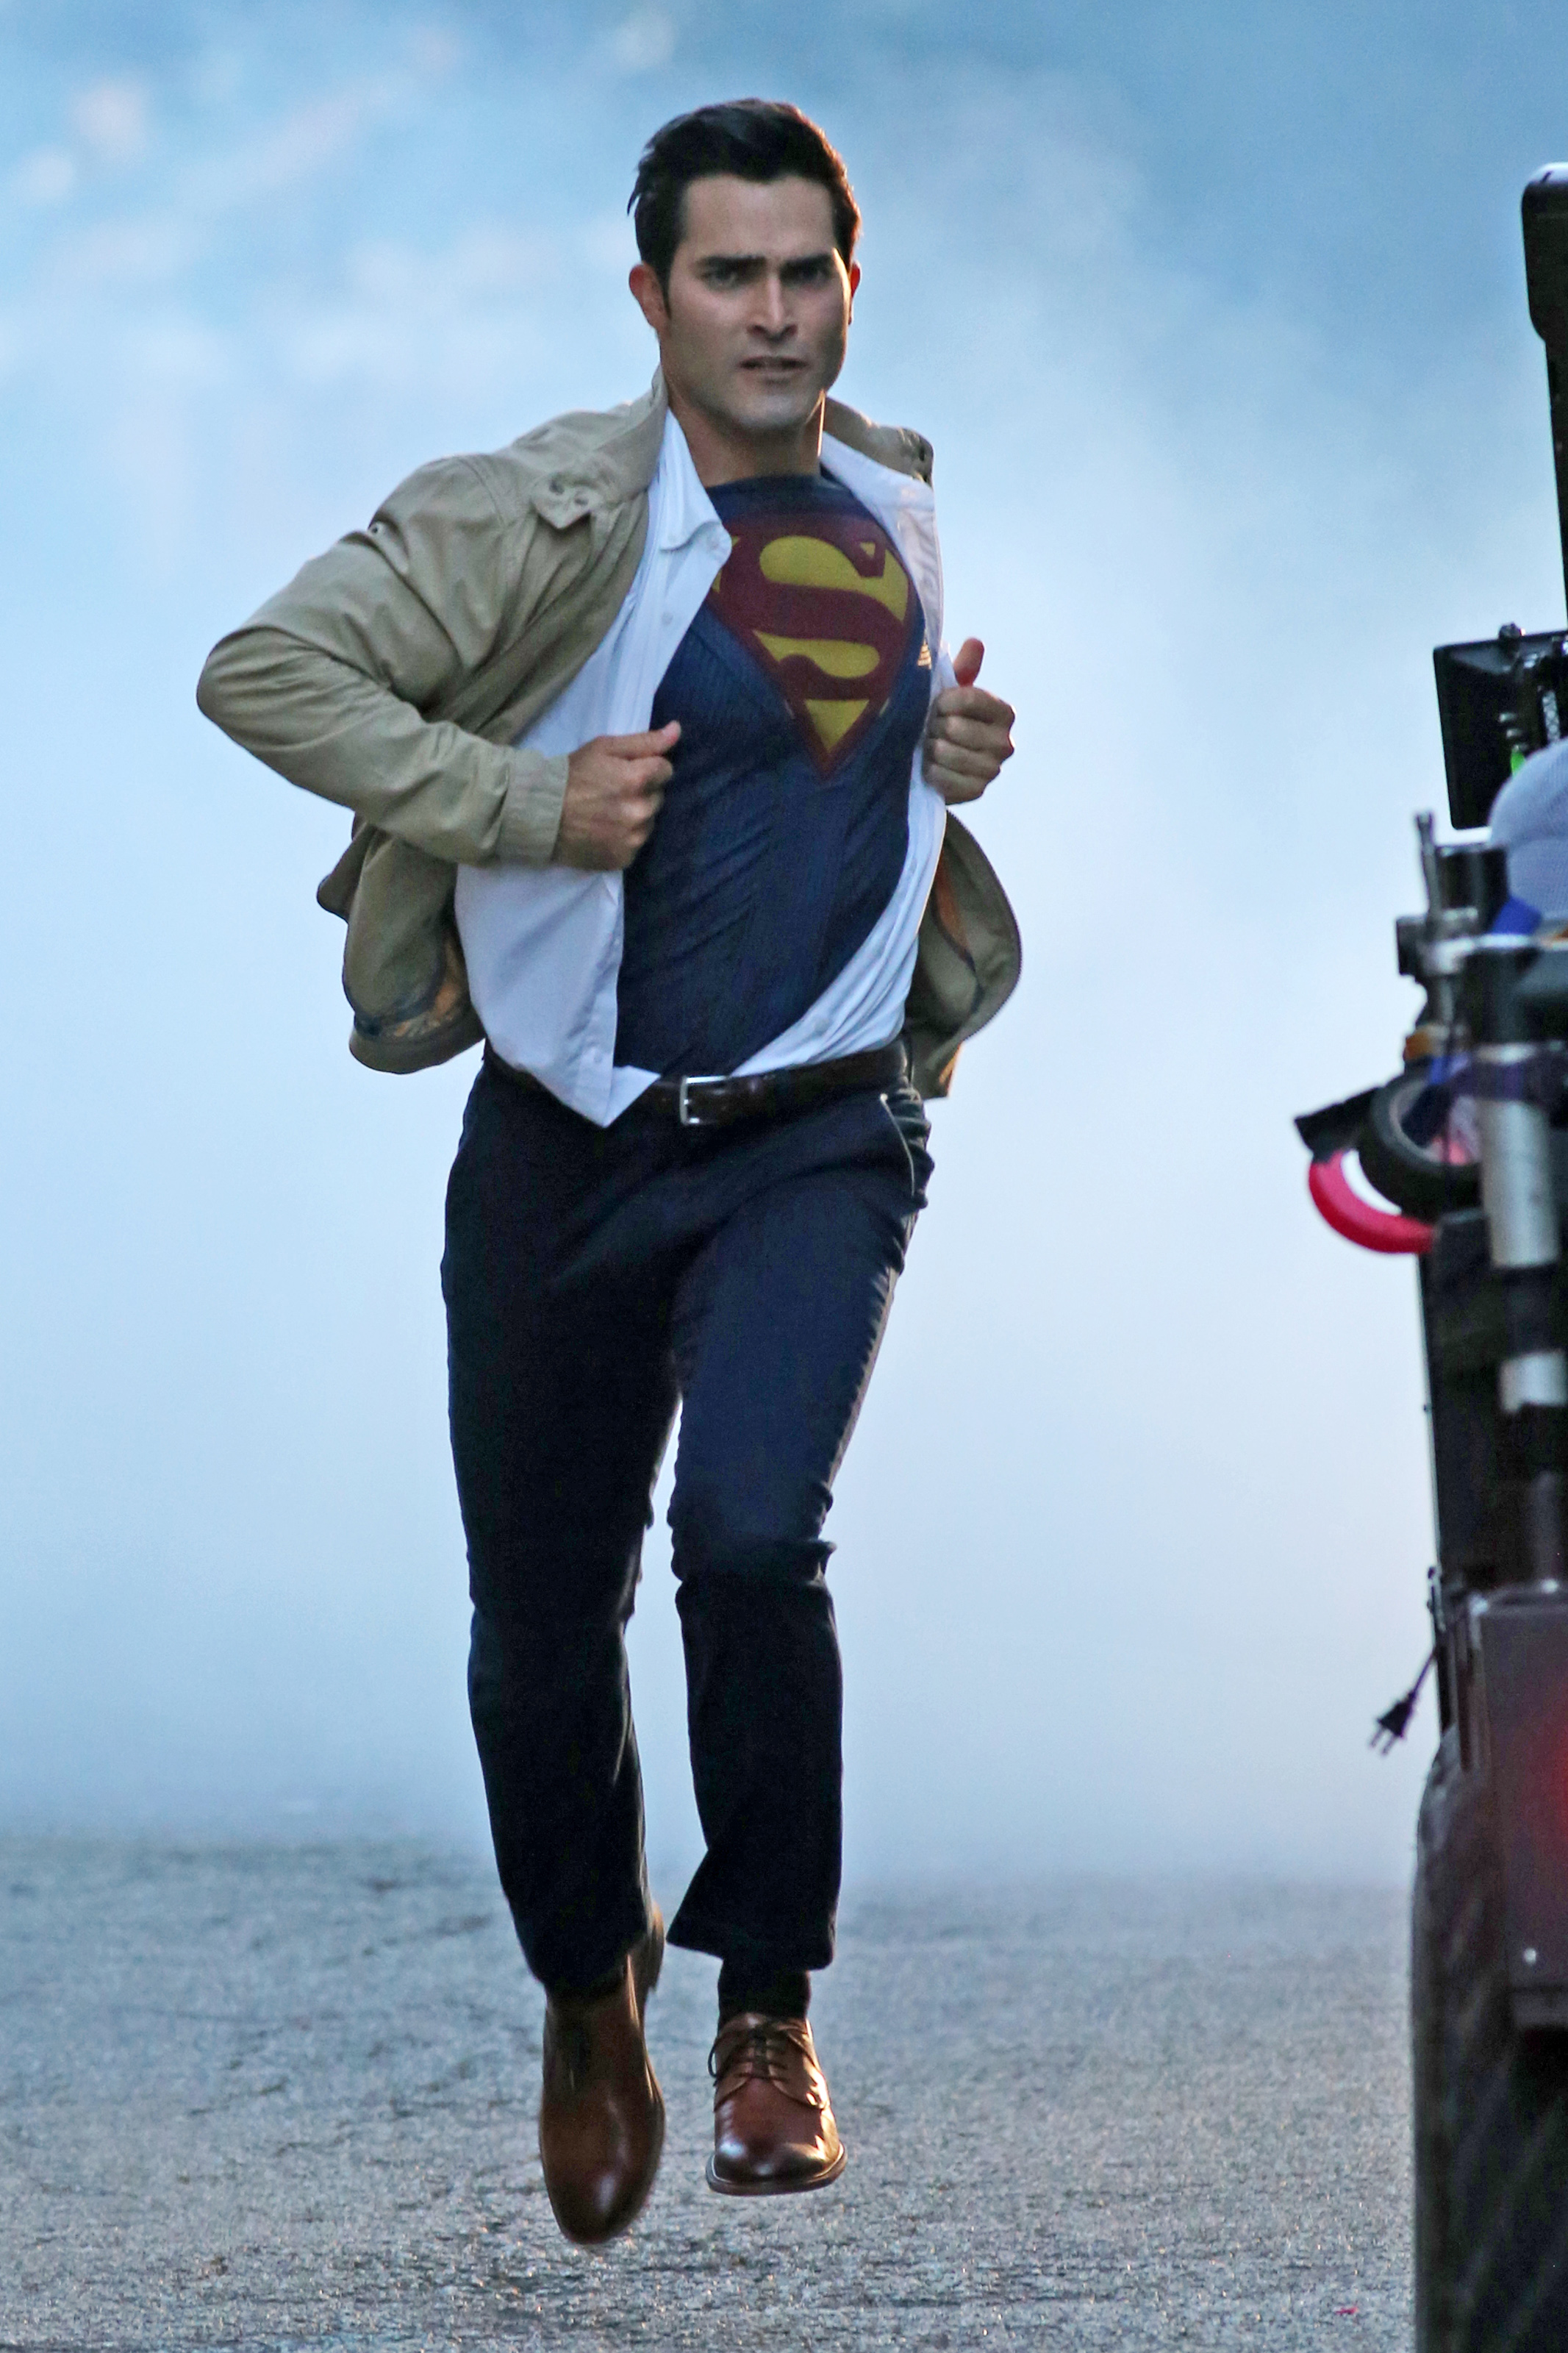 *EXCLUSIVE* Vancouver, Canada - Tyler Hoechlin rushes to save the day for "Supergirl" as he is seen revealing his Superman persona after ripping off his alter ego character, Clark Kent's street clothes. AKM-GSI August 1, 2016 To License These Photos, Please Contact : Maria Buda (917) 242-1505 mbuda@akmgsi.com sales@akmgsi.com Mark Satter (317) 691-9592 msatter@akmgsi.com sales@akmgsi.com www.akmgsi.com